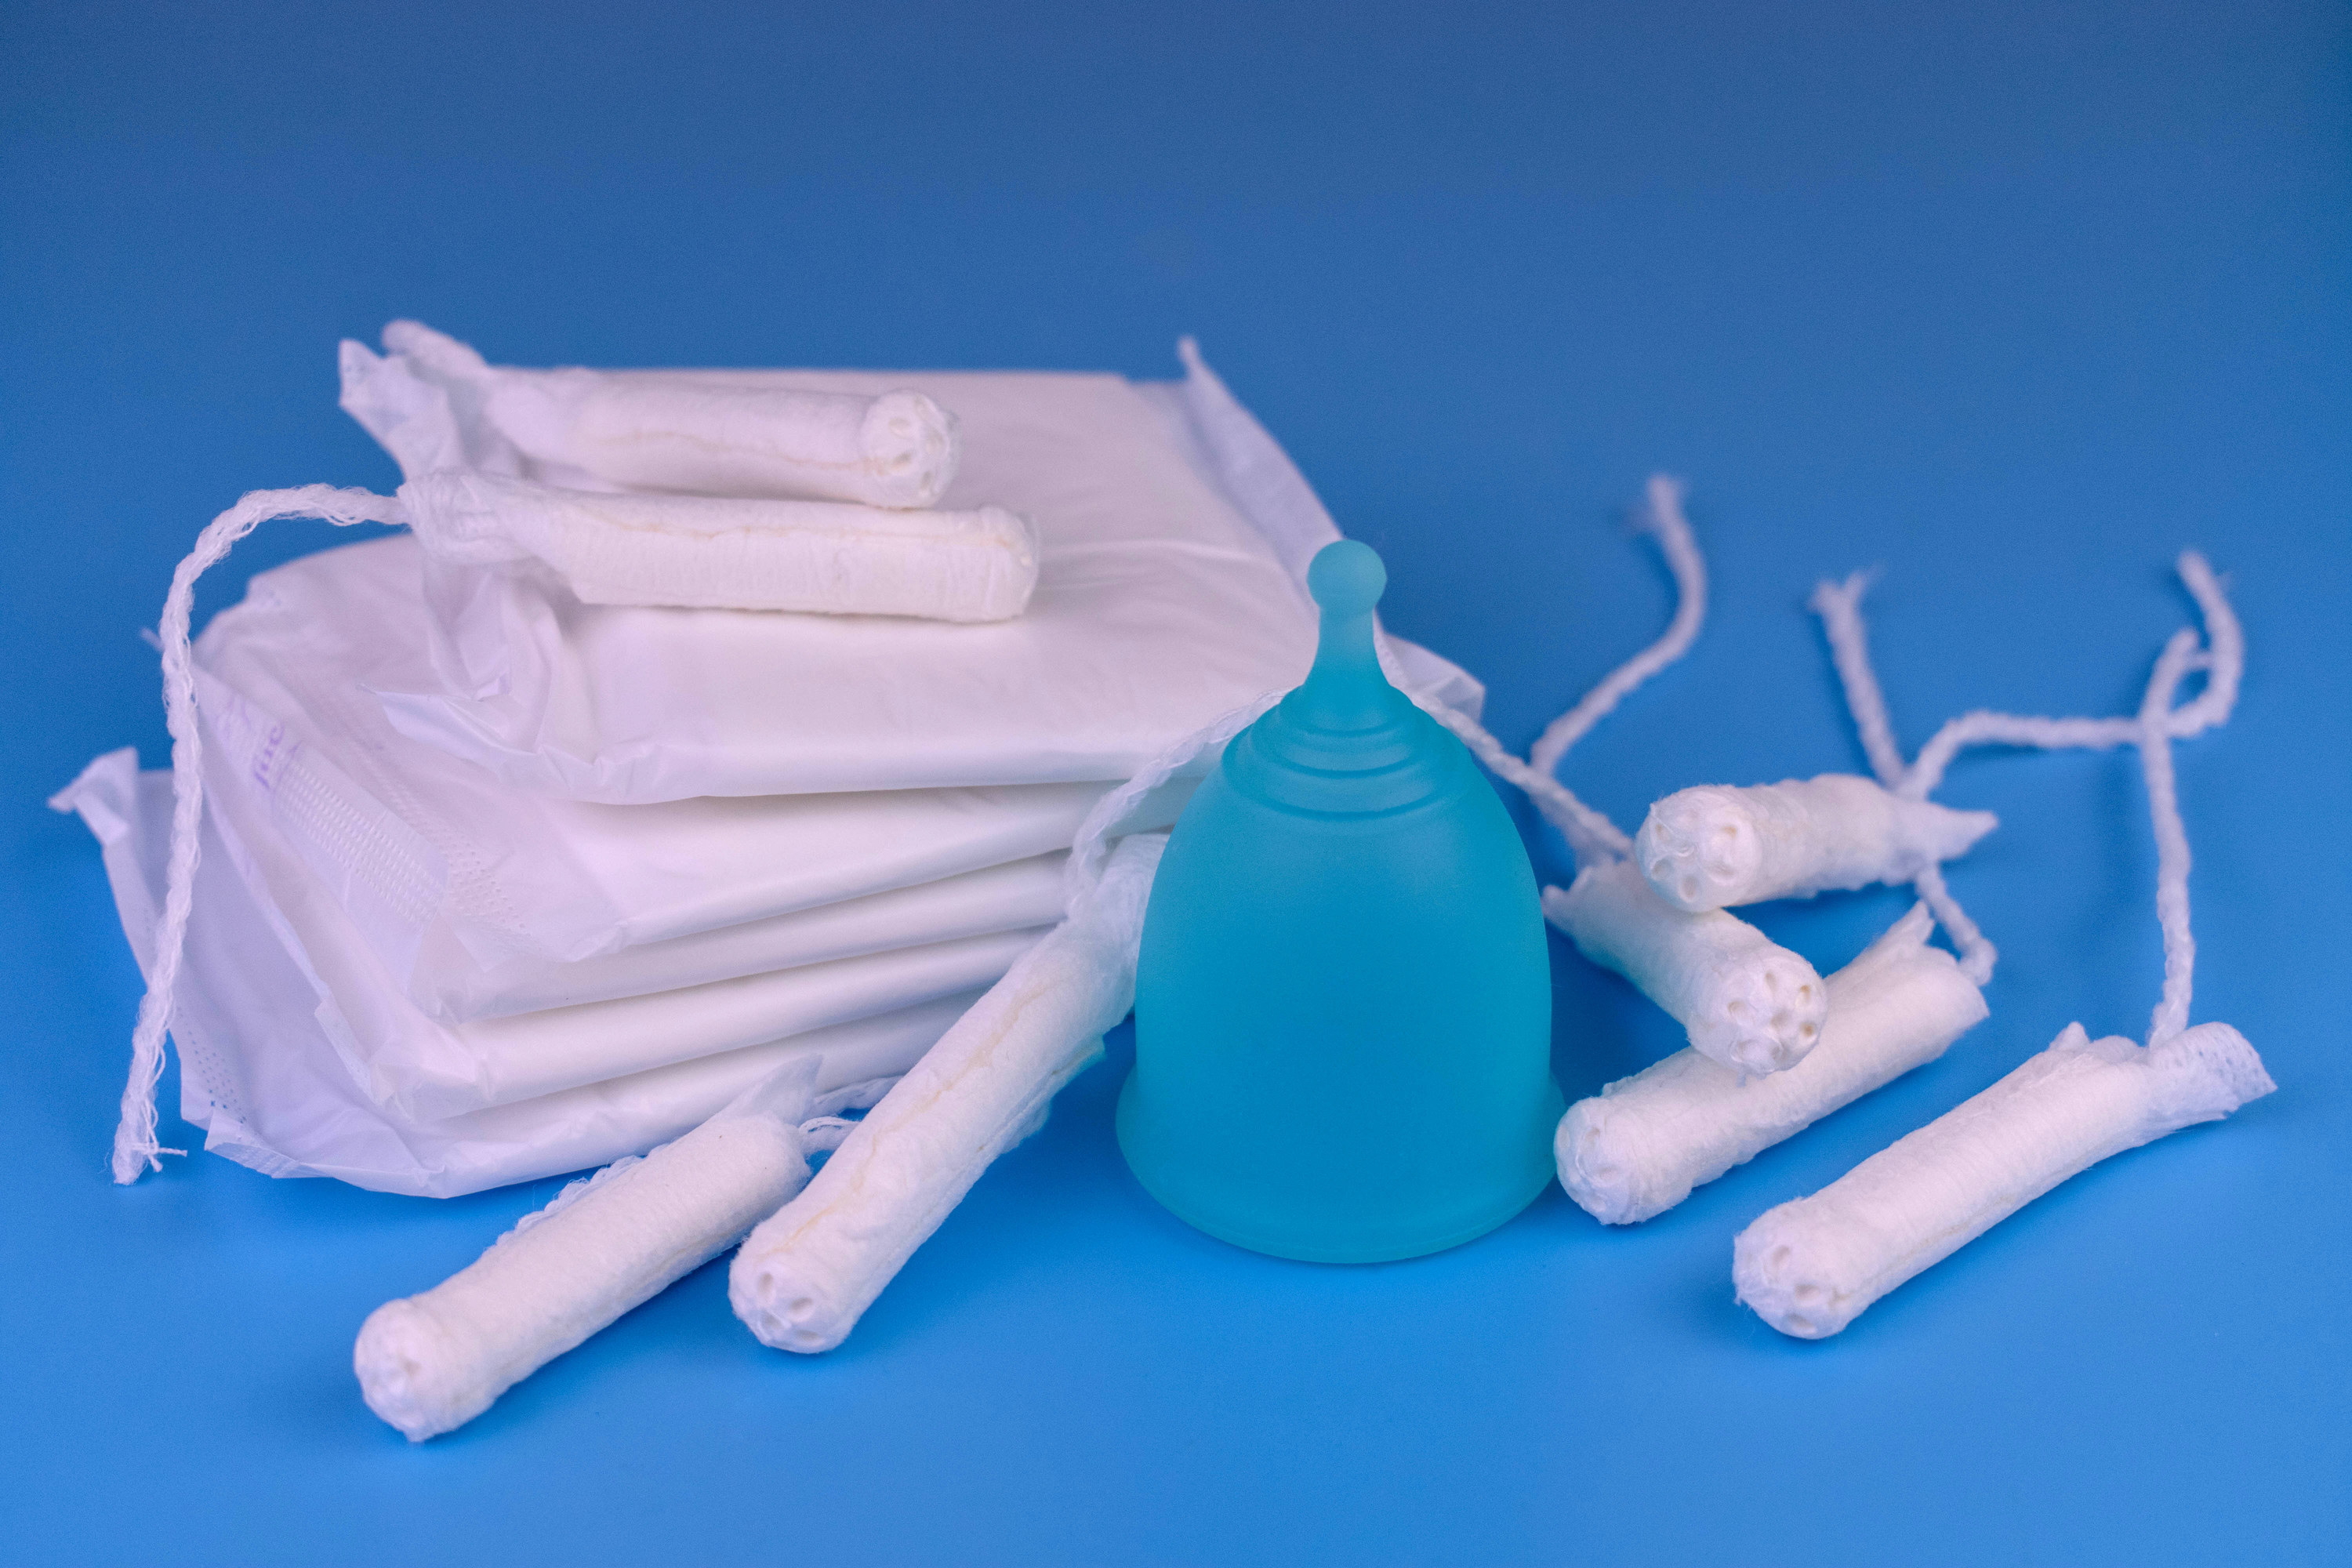 Varieties of personal hygiene products for women: tampons, pads, menstrual cup on a blue background